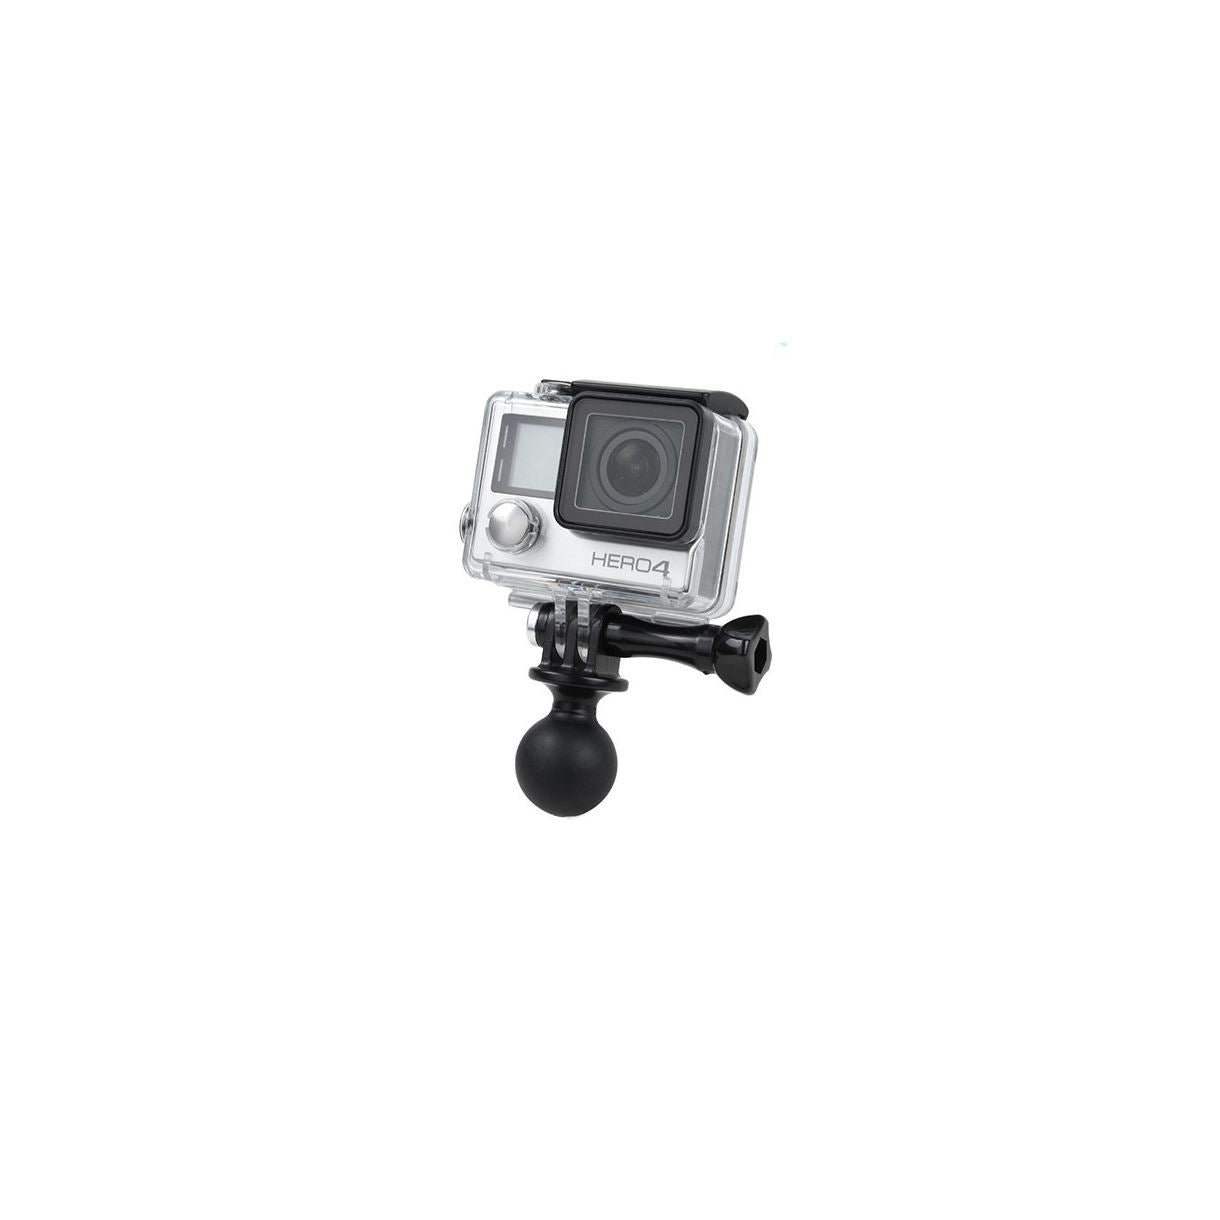 Ball mount for GoPro